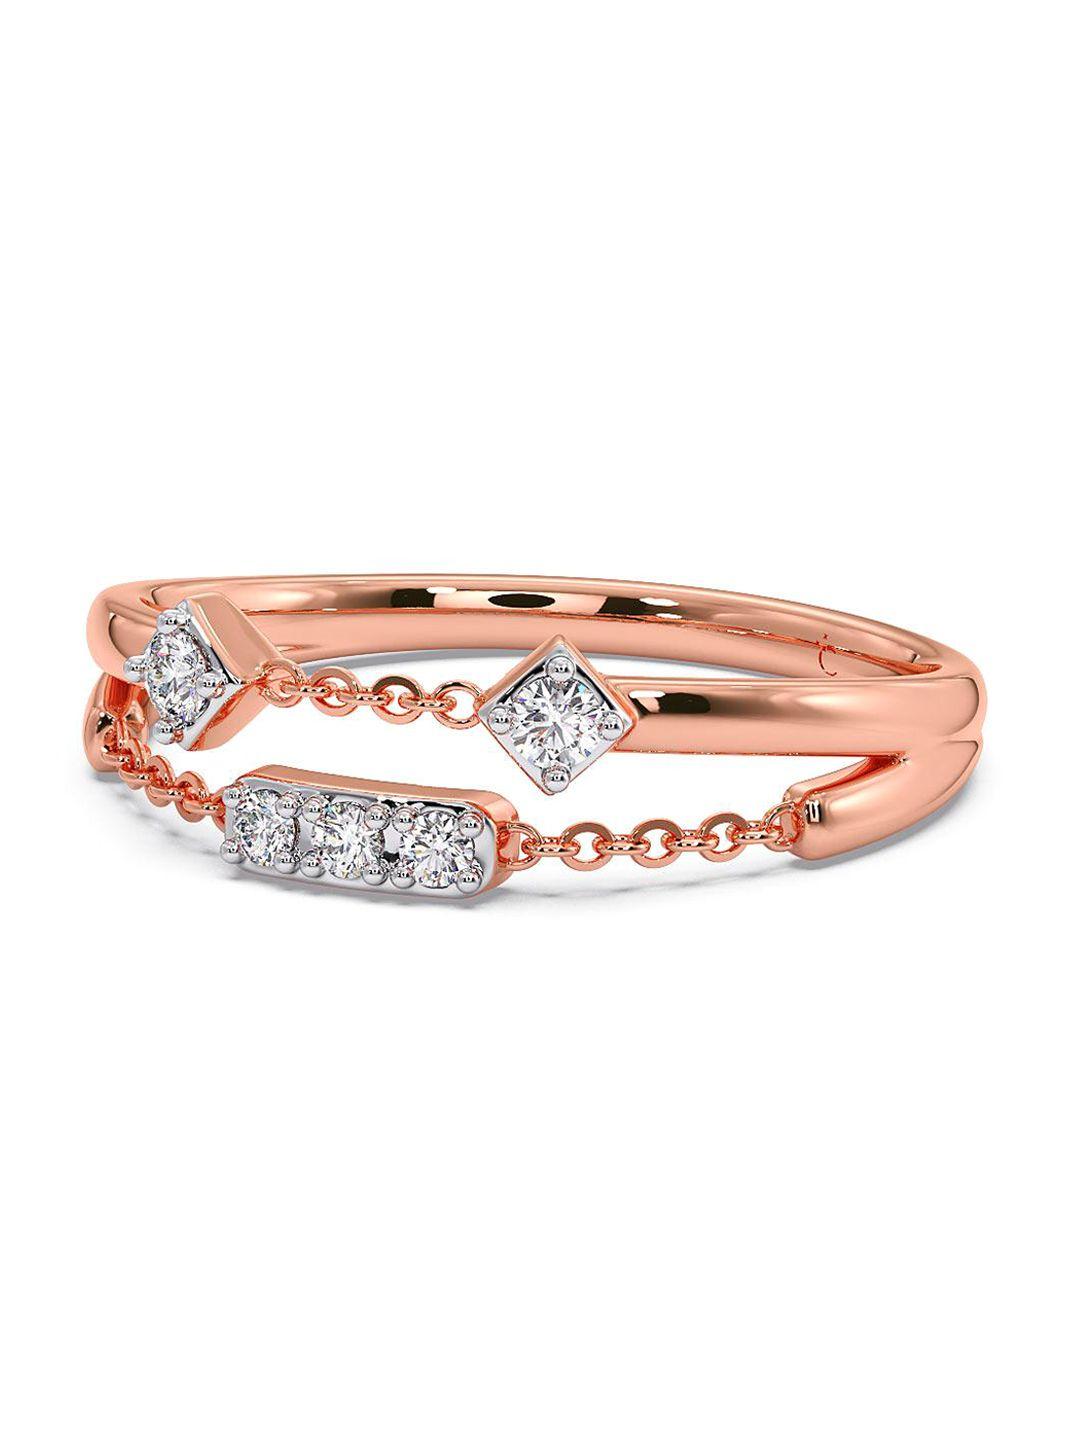 candere a kalyan jewellers company 14kt cz-studded rose gold ring- 2.05 gm